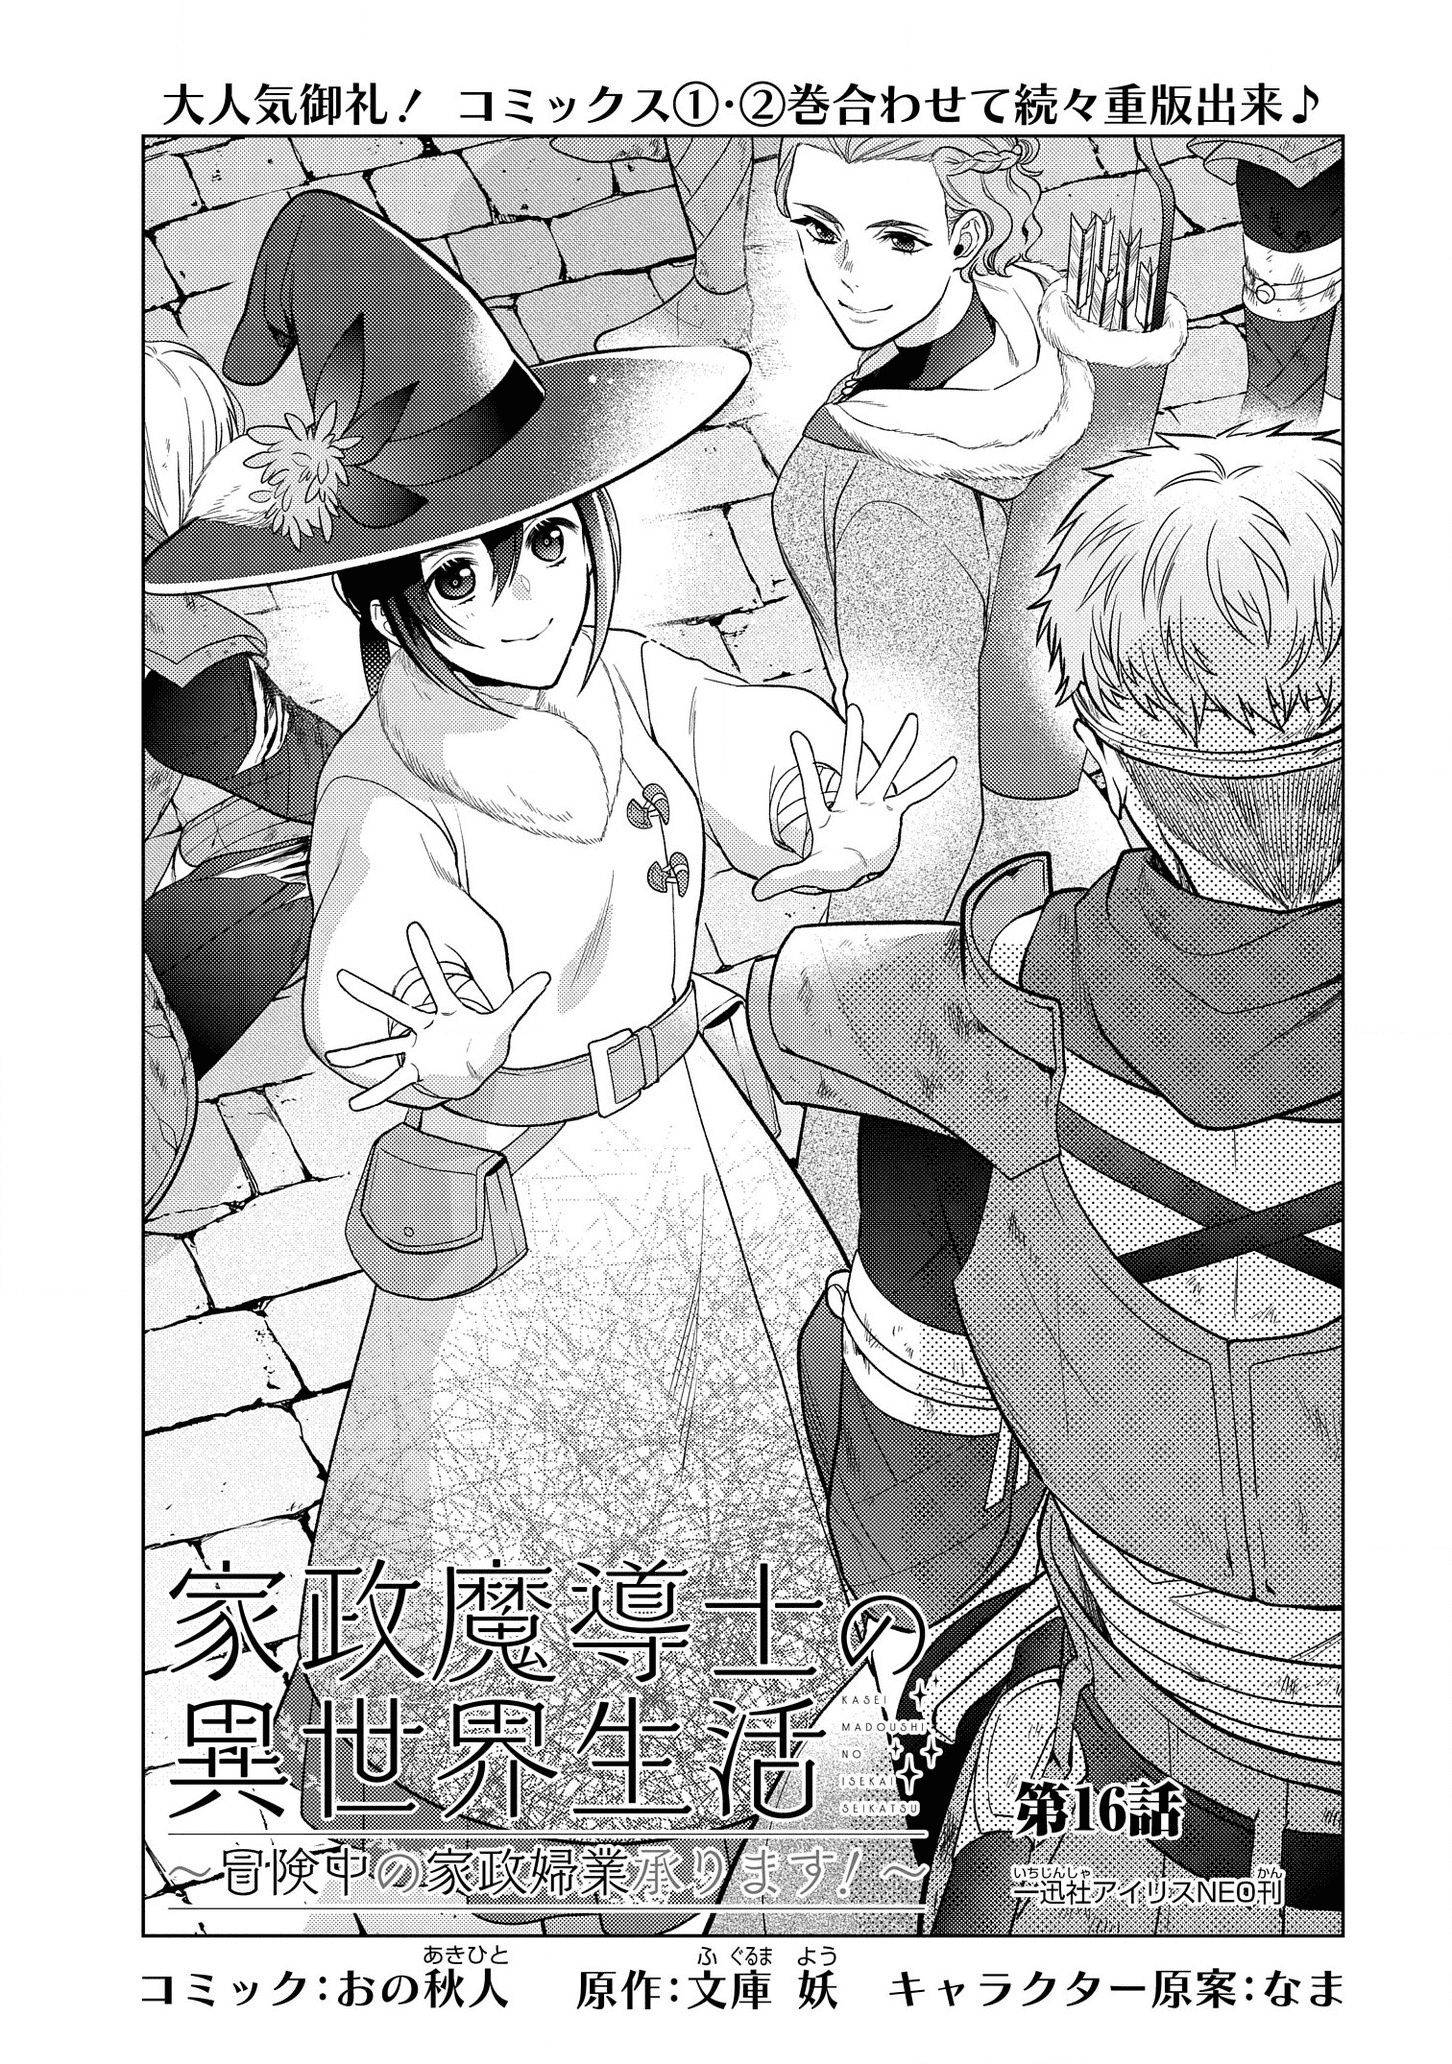 Read Life in Another World as a Housekeeping Mage Manga English [New  Chapters] Online Free - MangaClash